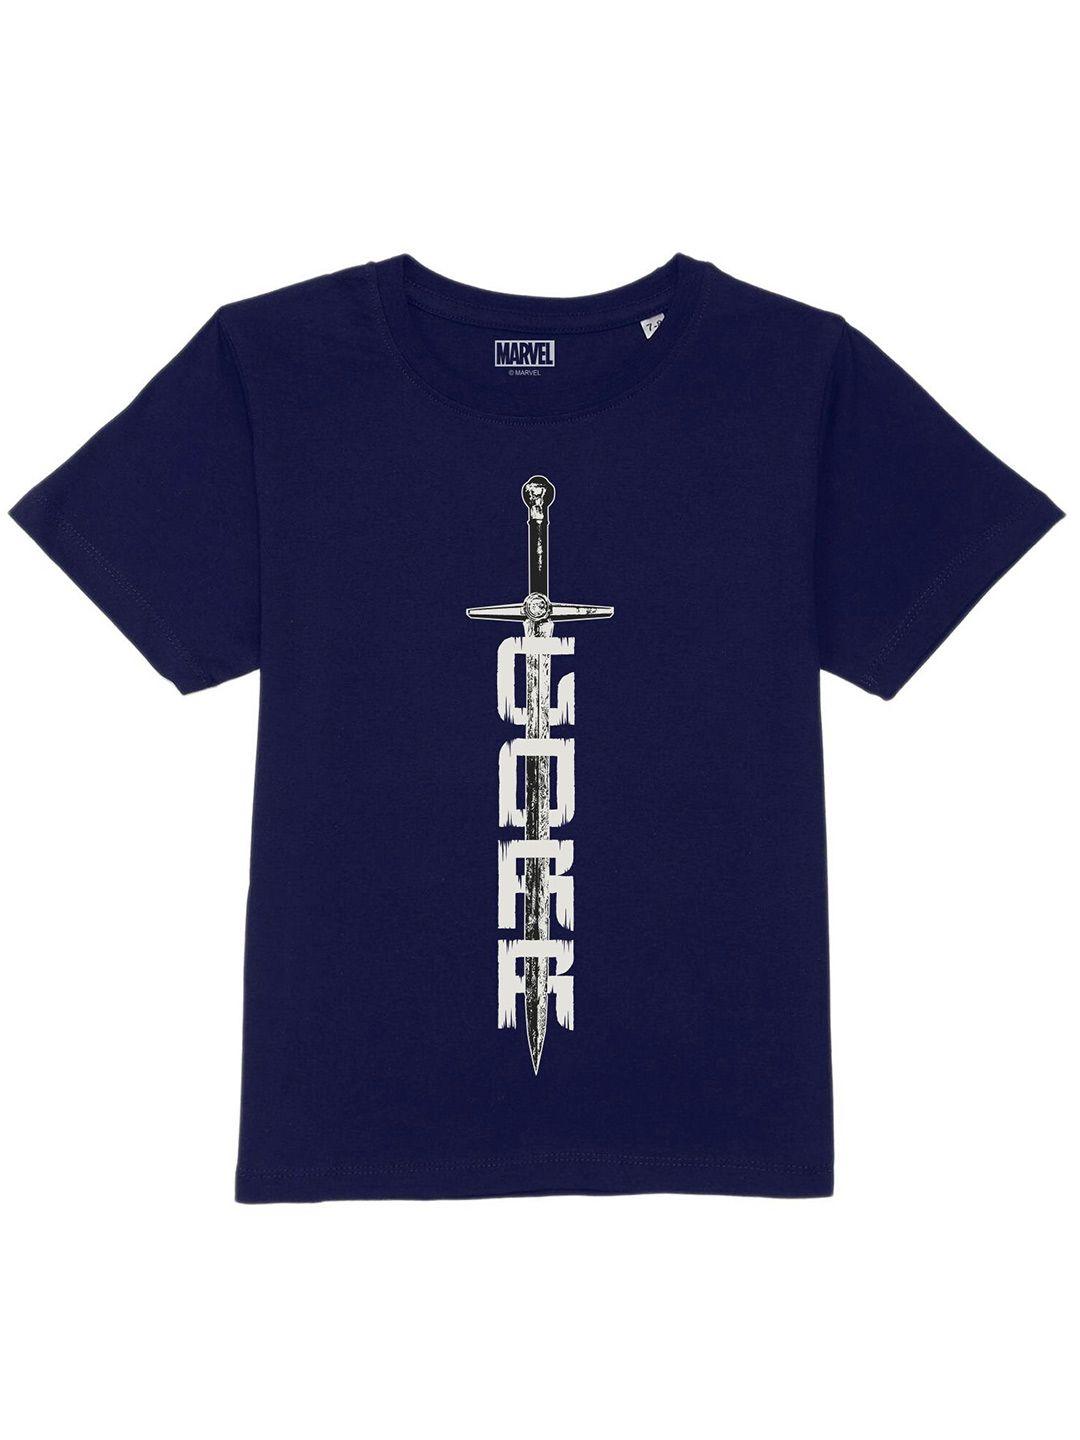 marvel by wear your mind boys navy blue t-shirt